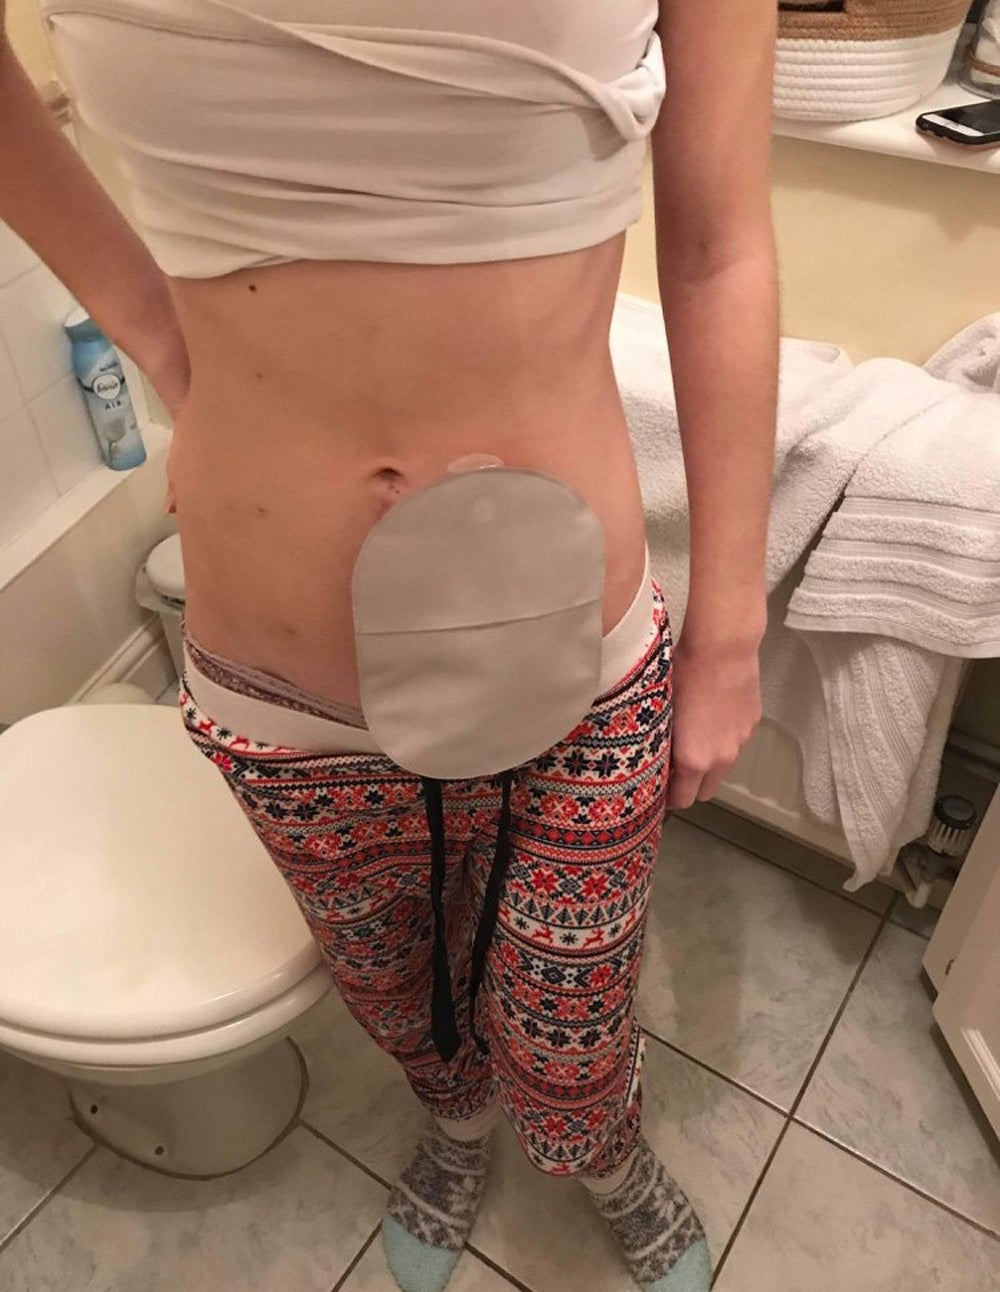 Sophie Anderson, 24, with her first colostomy bag (Collect/PA Real Life)